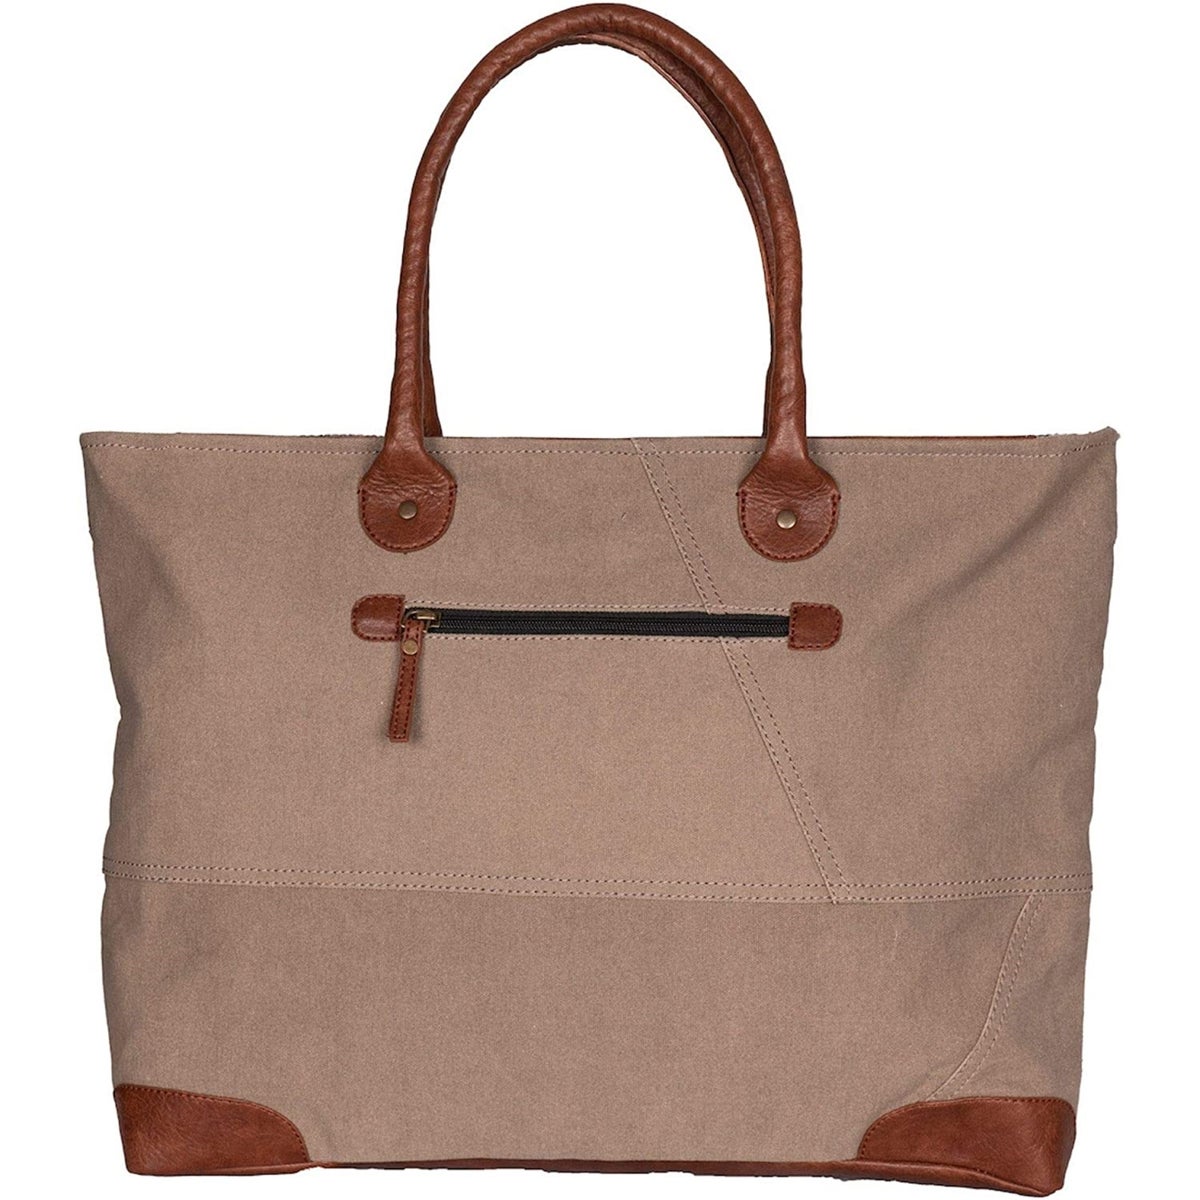 "Telegraph Upcycled Canvas Tote Bag, Blue"